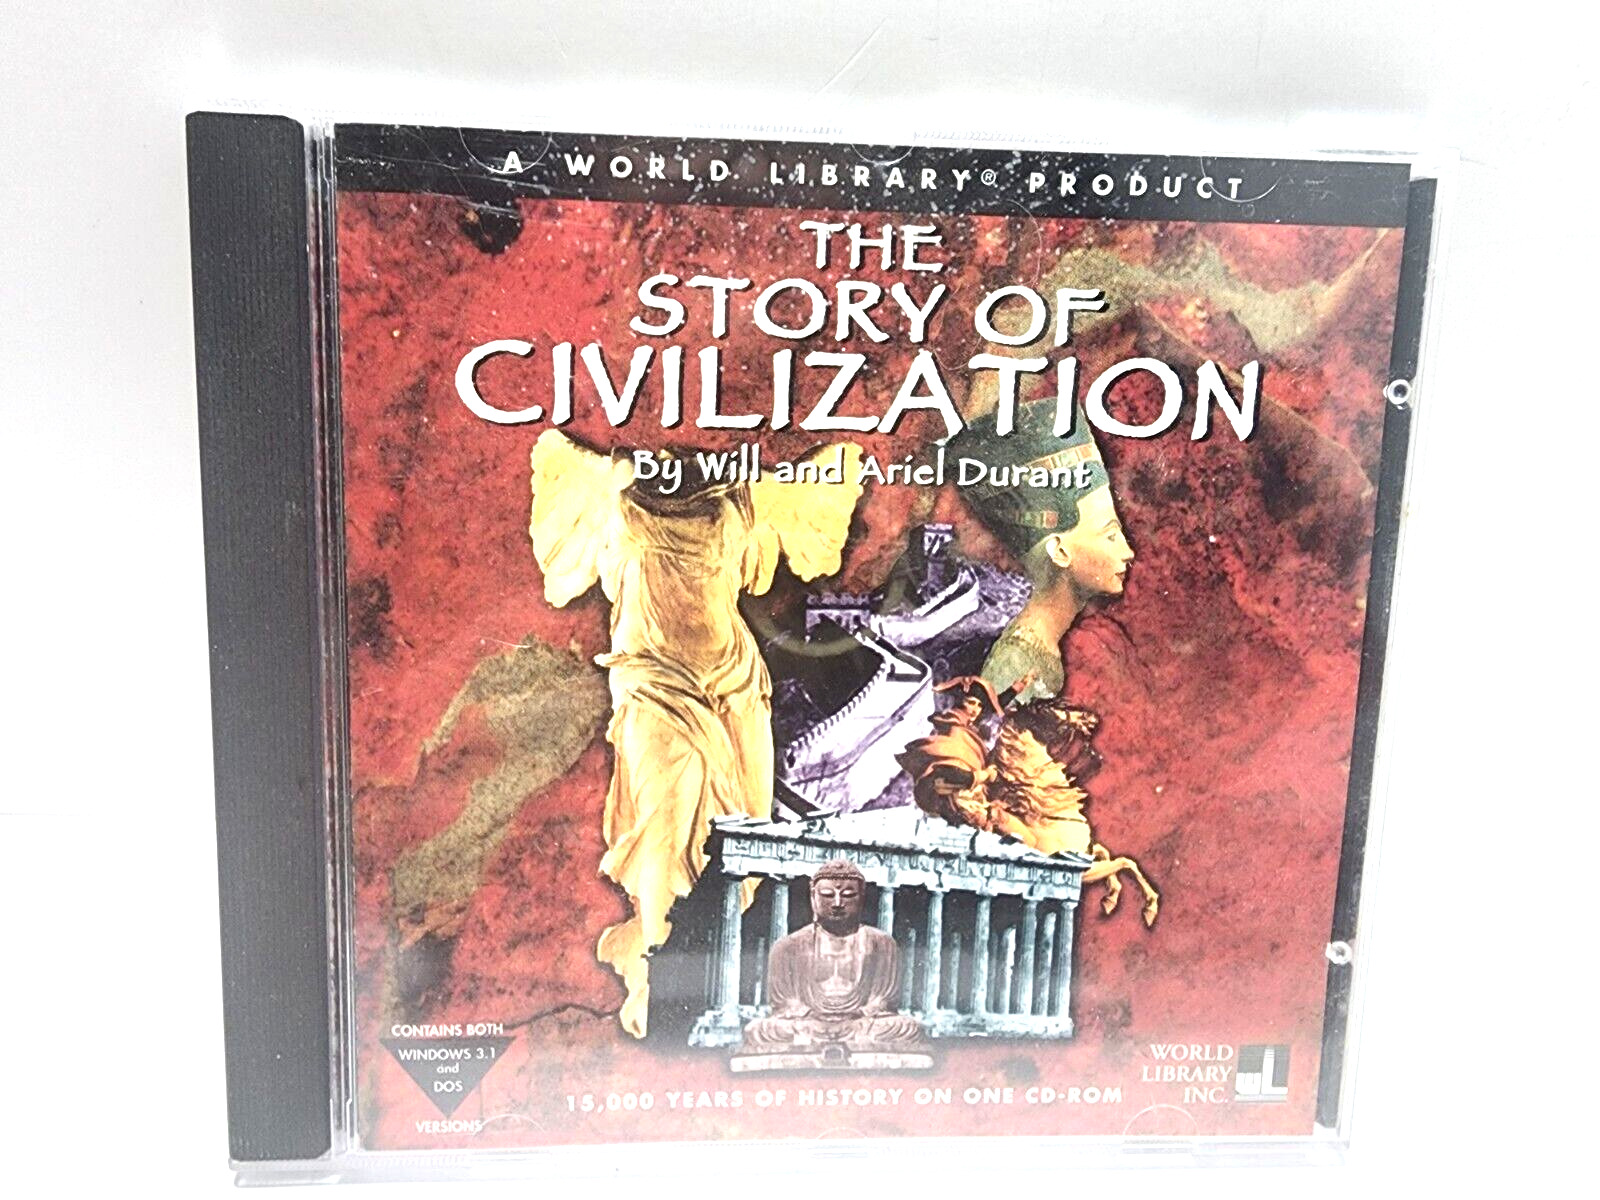 The Story Of Civilization PC CD-ROM entire history world Will & Ariel Durant